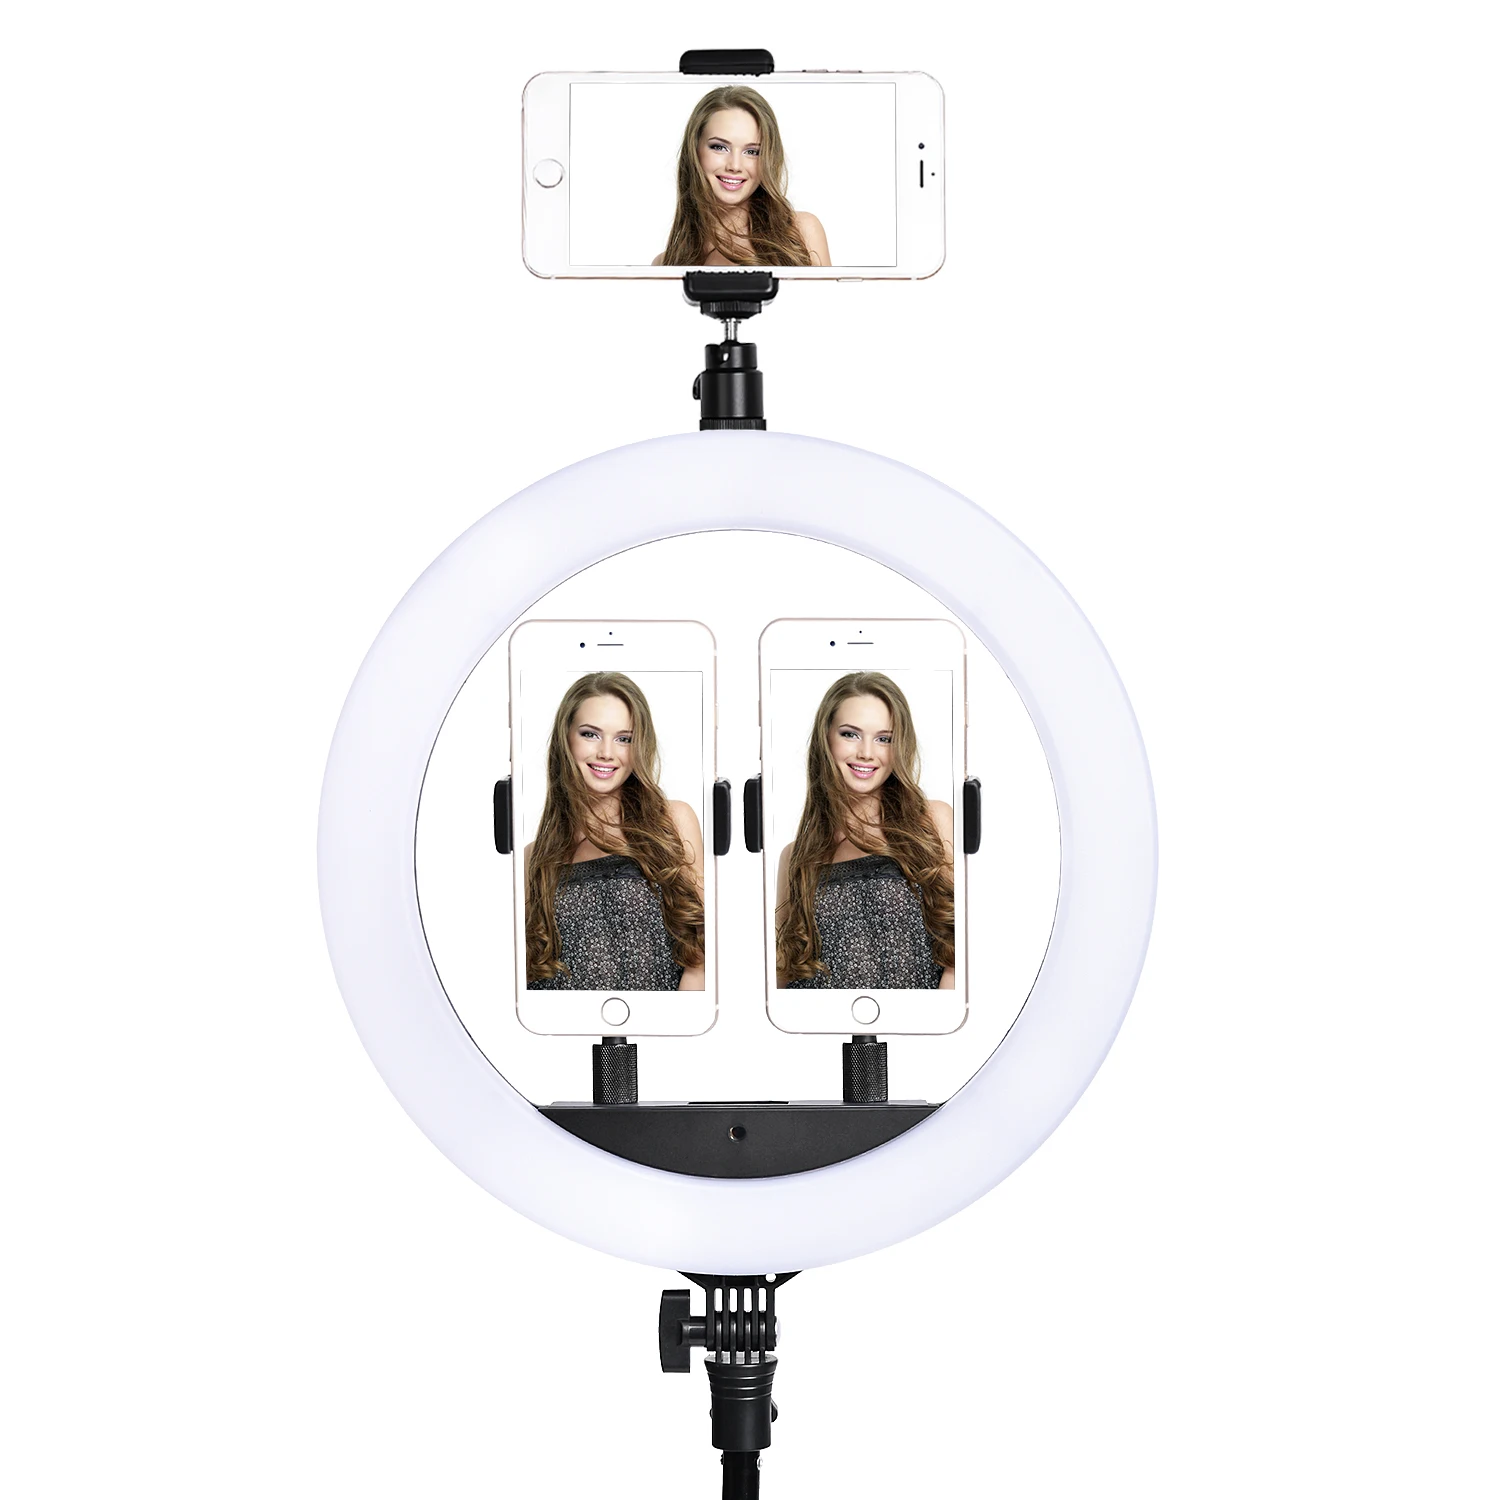 H38f2f317981a451e85fa66d90804c193b fosoto LED Ring Light Selfie Photo Photography Lighting Ringlight lamp With Tripod Stand For Photo Studio Makeup Video Live Show